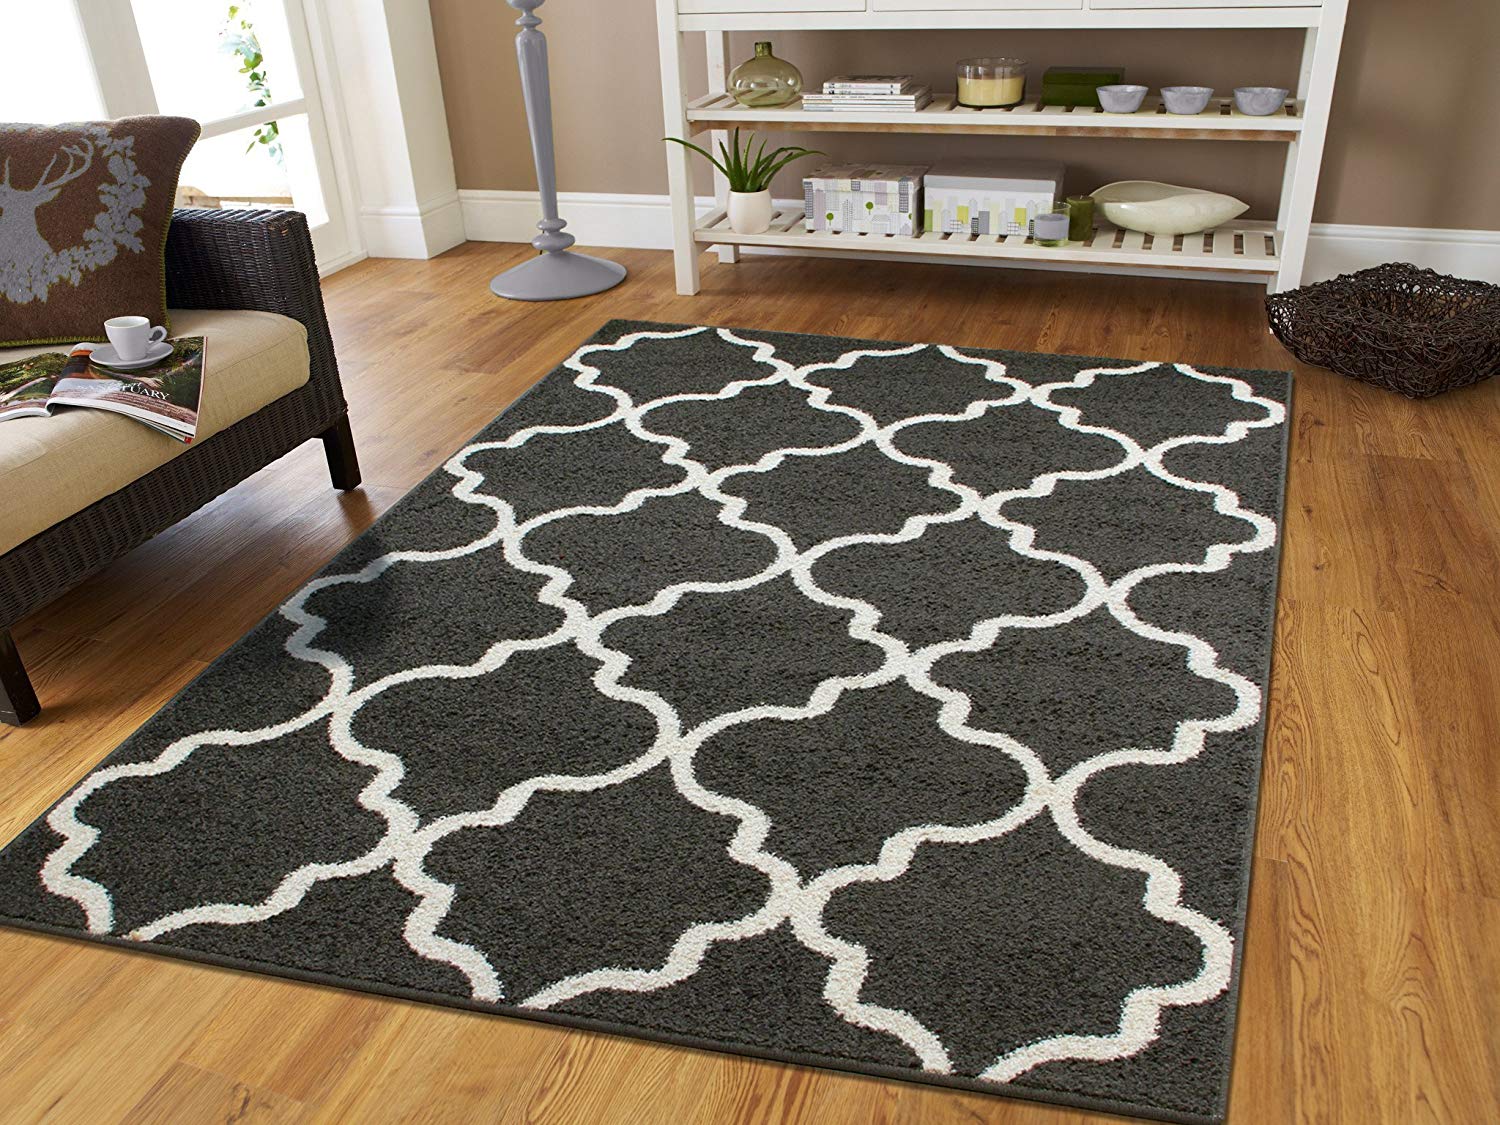 floor rugs amazon.com: large 8x11 morrocan trellis area rug gray contemporary rugs  8x10 for NSPWFDS